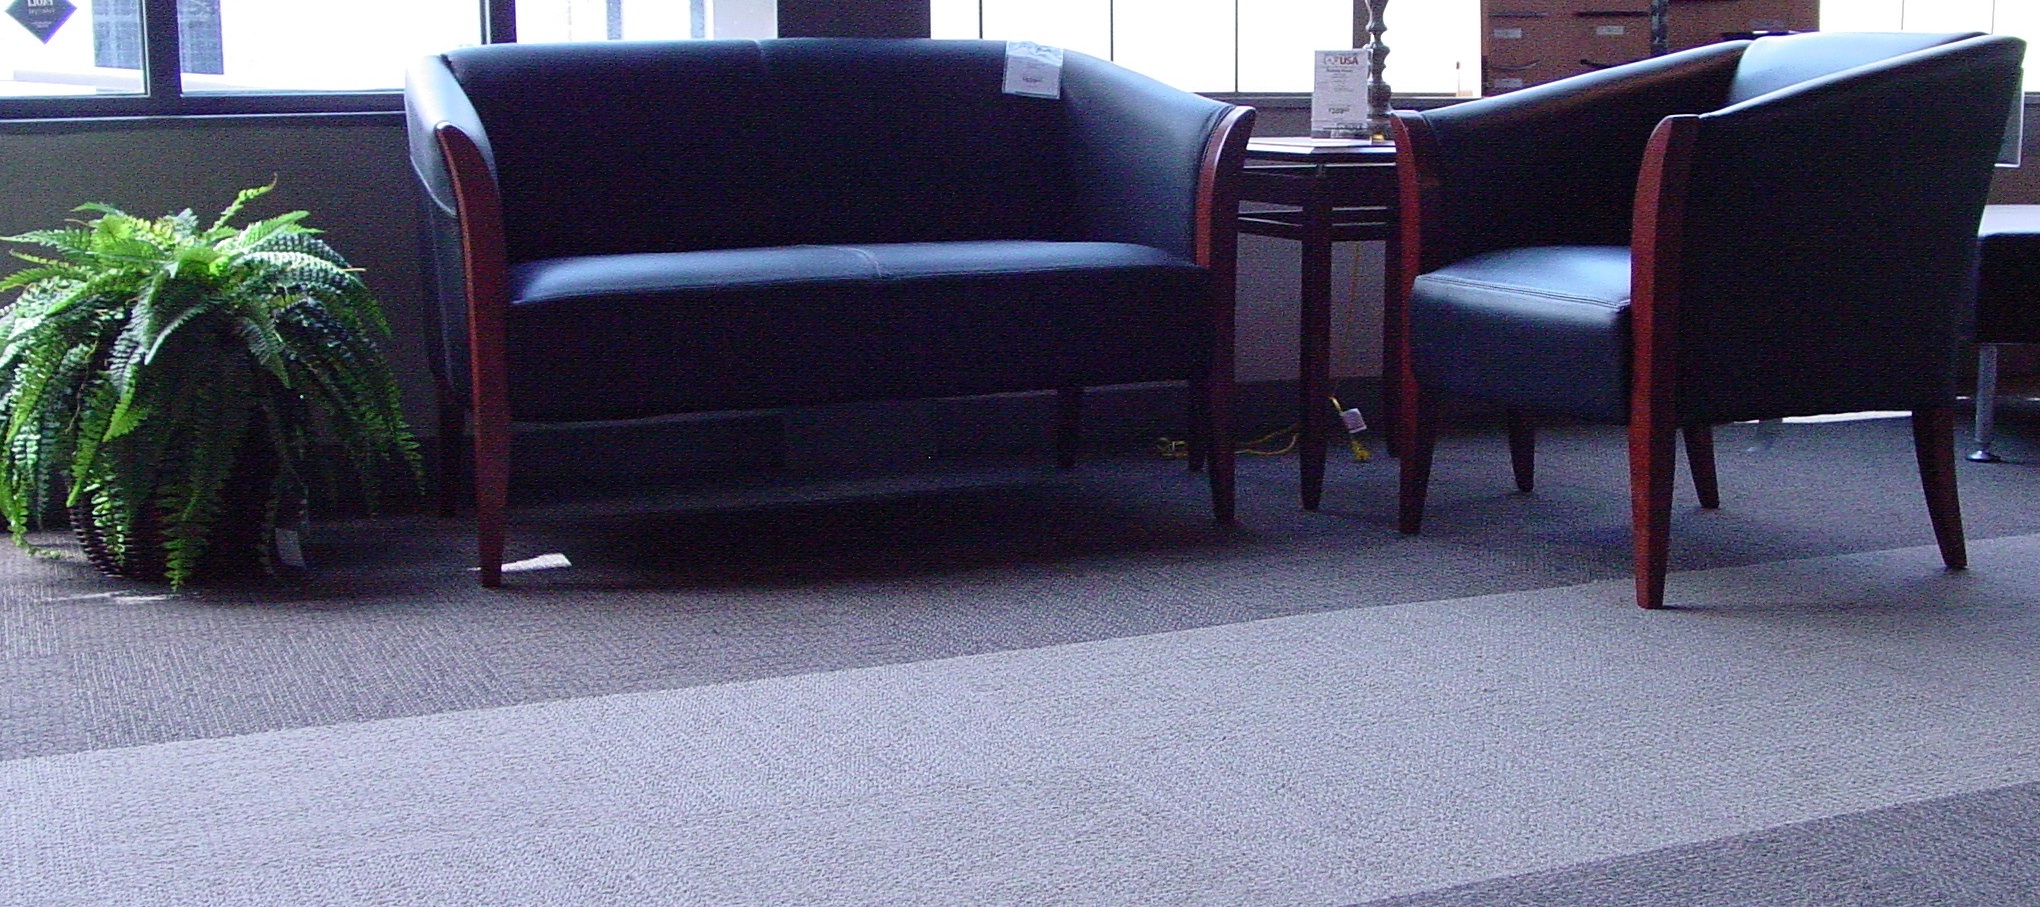 Protect your commercial carpet